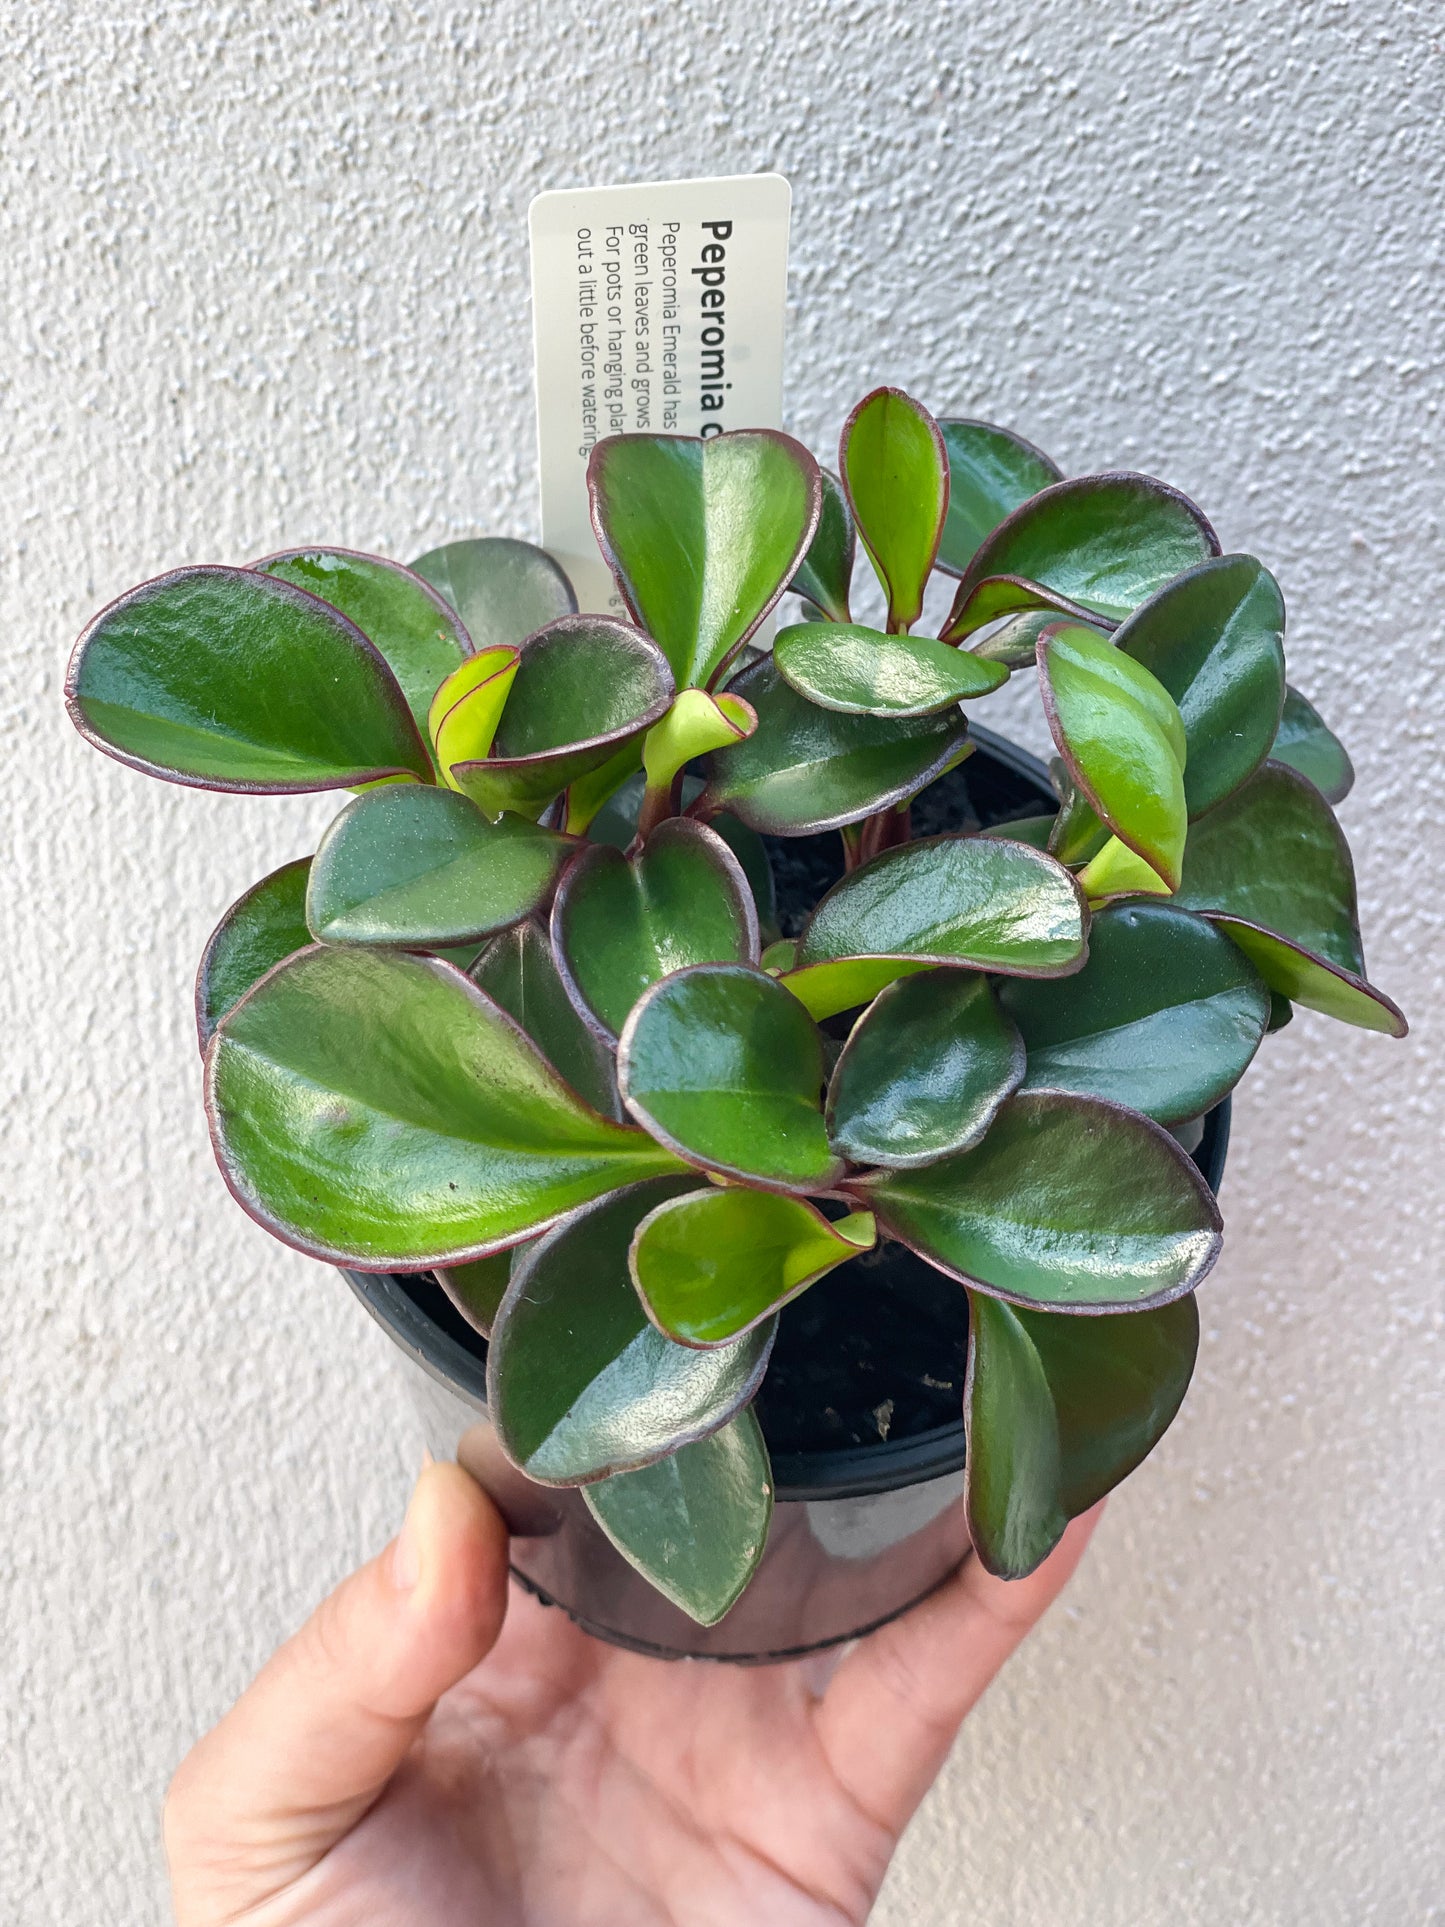 Peperomia Red Edge Brisbane, Peperomia Red Edge for sale Brisbane south,  indoor plants Brisbane, indoor plants Brisbane southside, brisbane indoor plants, potted plants Brisbane southside, plant small business near me, buy indoor plants online Brisbane, indoor plants brisbane for sale, buy indoor plants online Brisbane southside, buy indoor plants Brisbane southside,